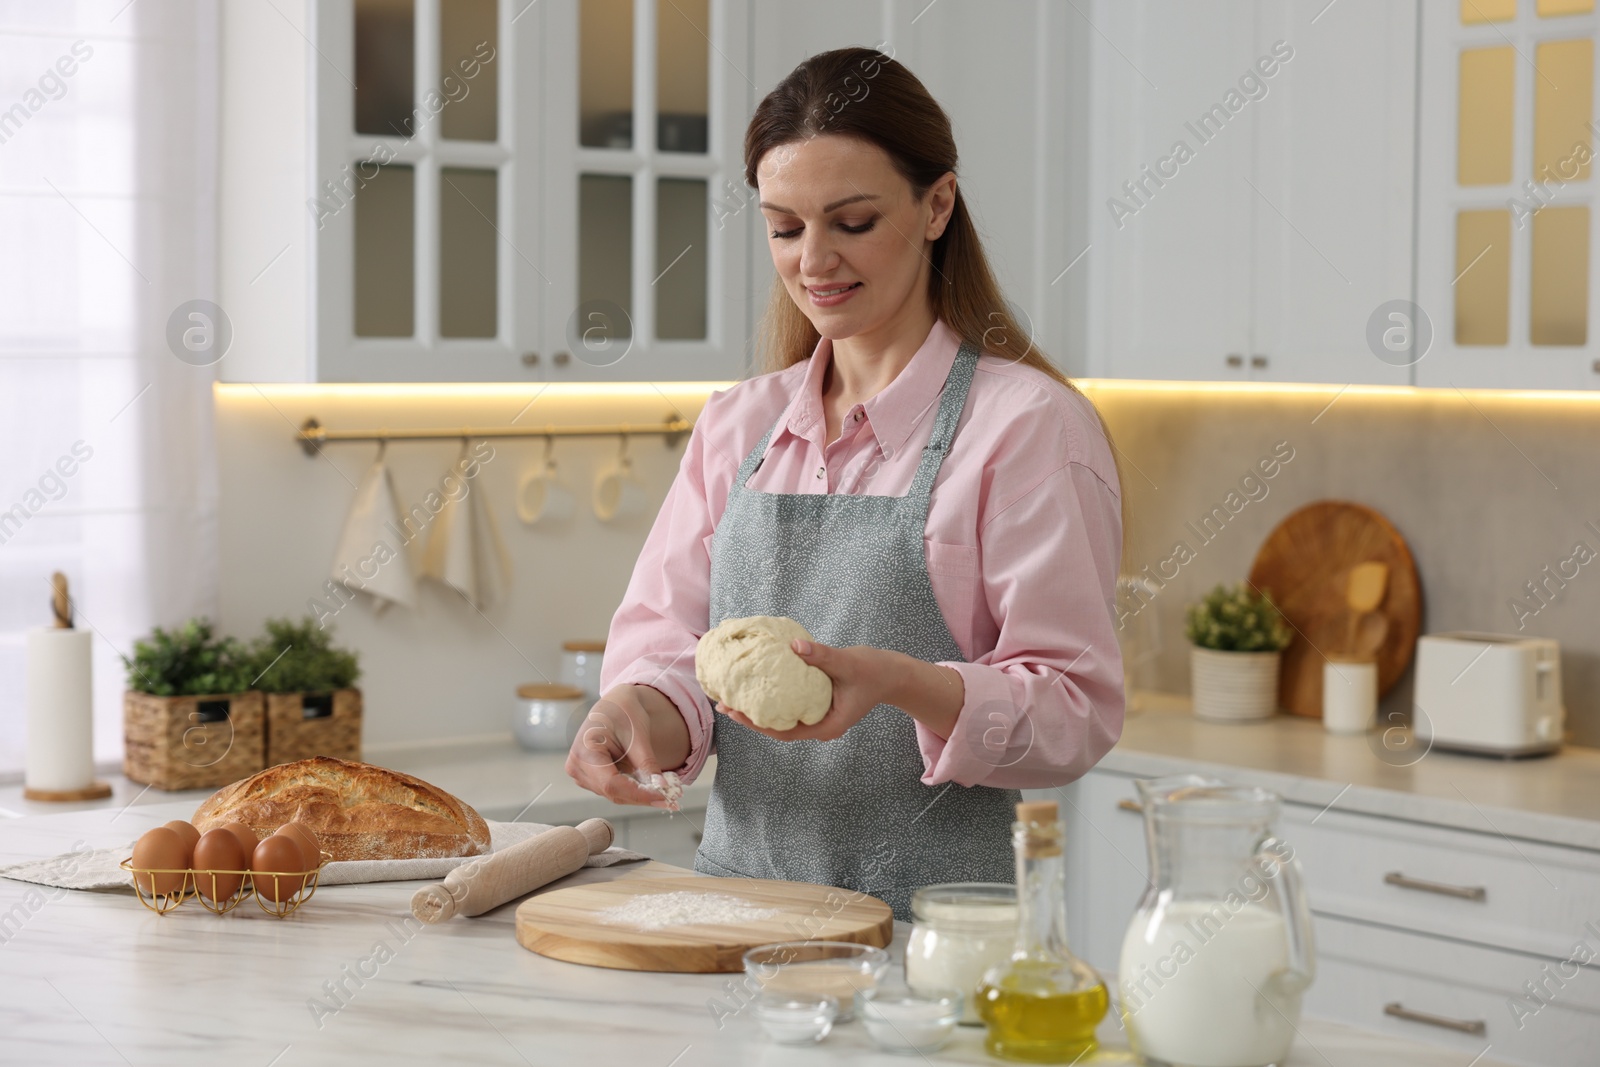 Photo of Making bread. Woman preparing raw dough at white table in kitchen